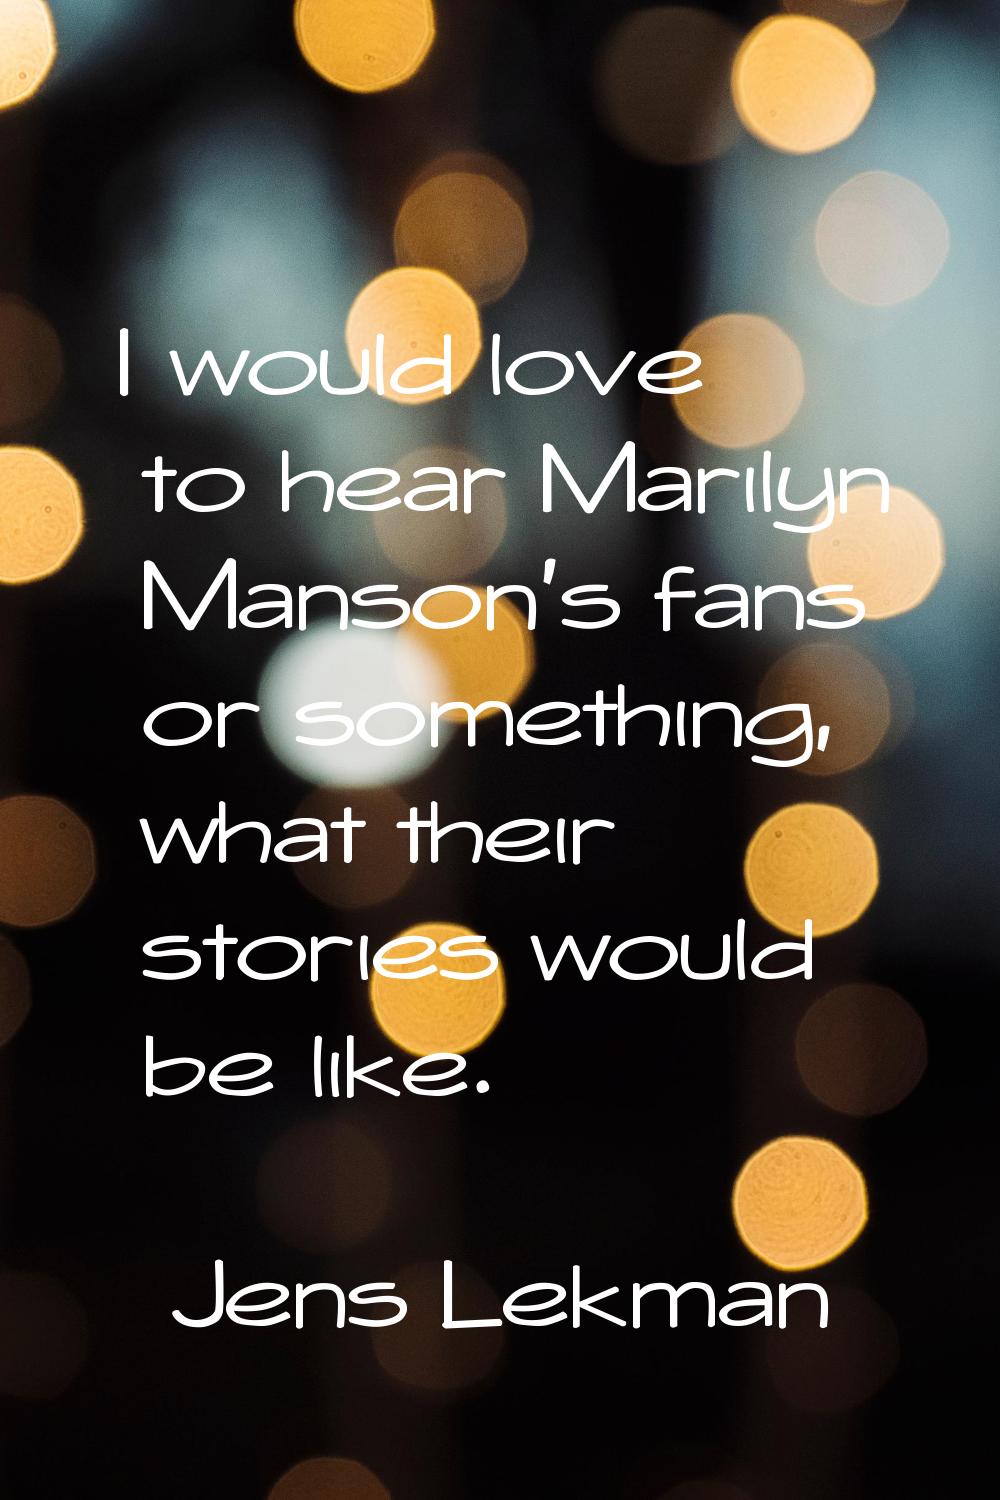 I would love to hear Marilyn Manson's fans or something, what their stories would be like.